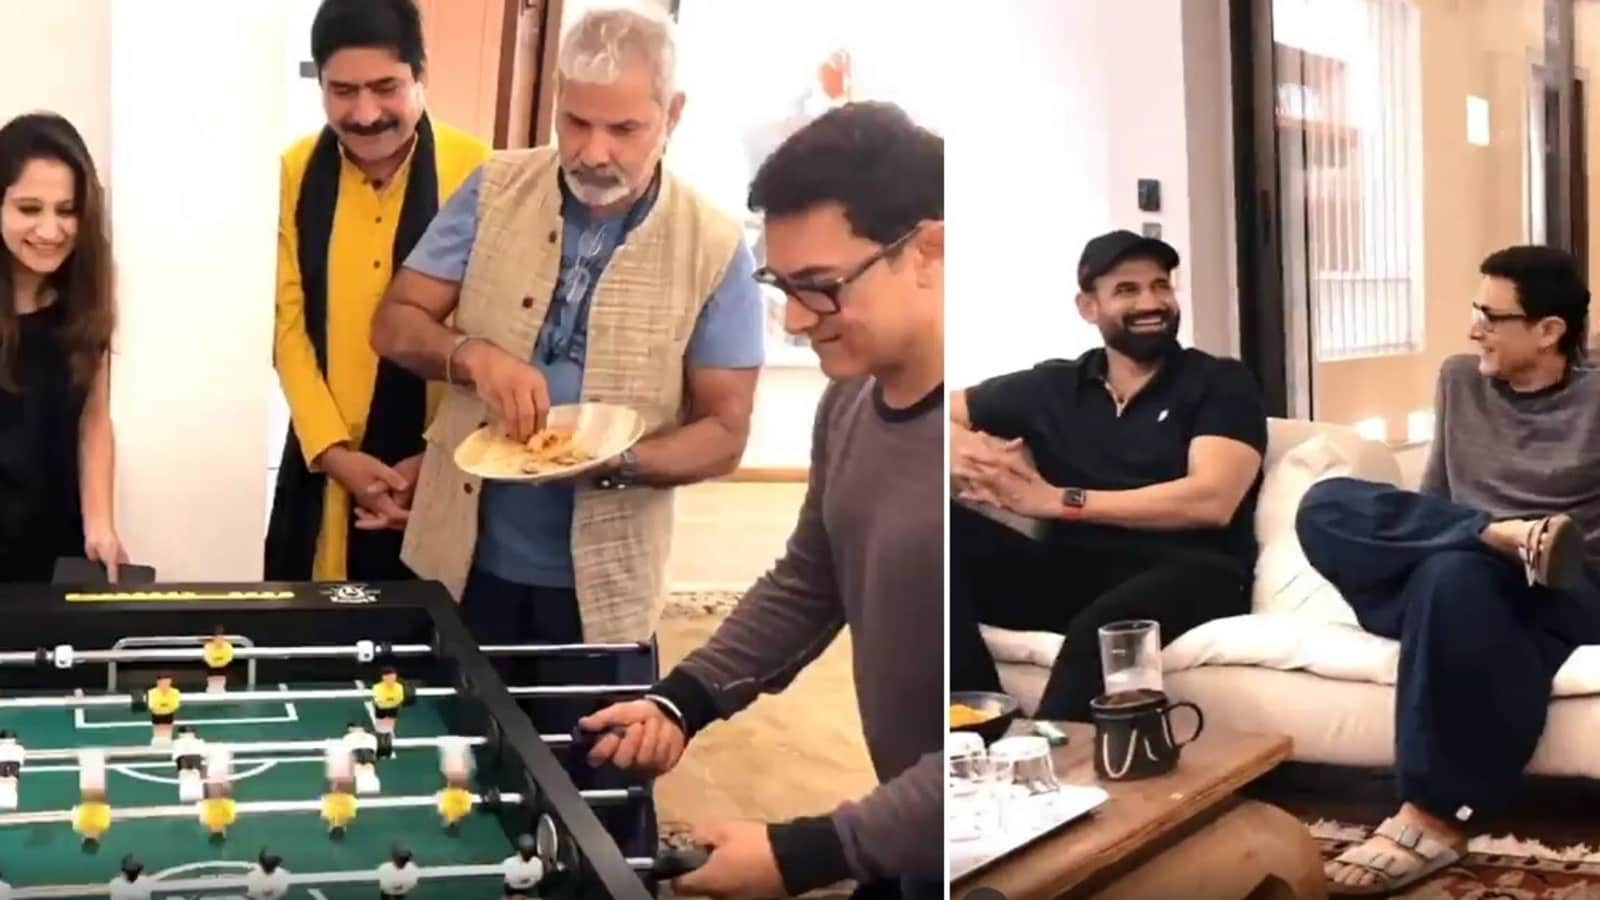 Aamir Khan hosts Lagaan reunion at his home as film completes 21 years, Irfan Pathan also joins them. Watch